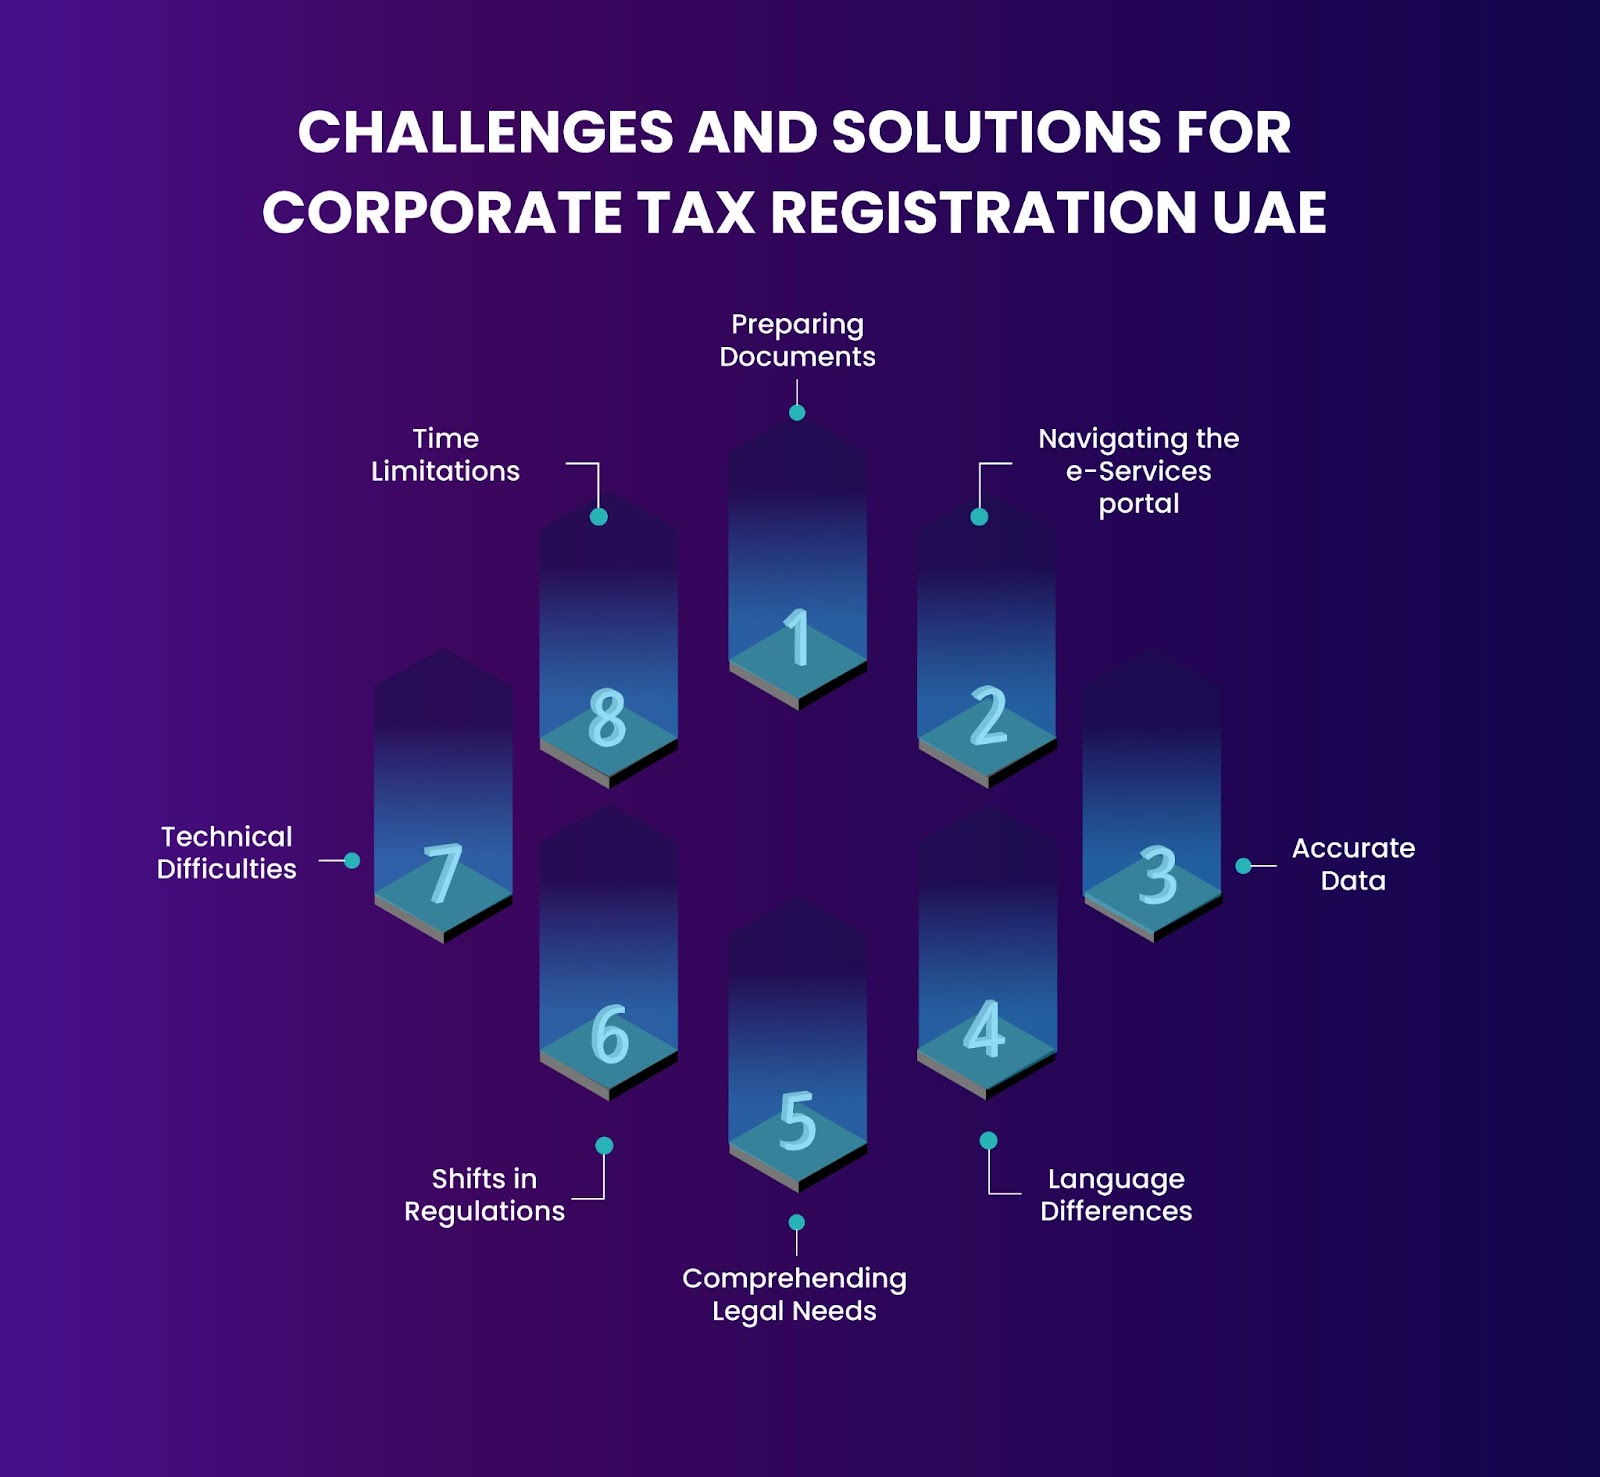 Challenges and Solutions for Corporate Tax Registration in the UAE